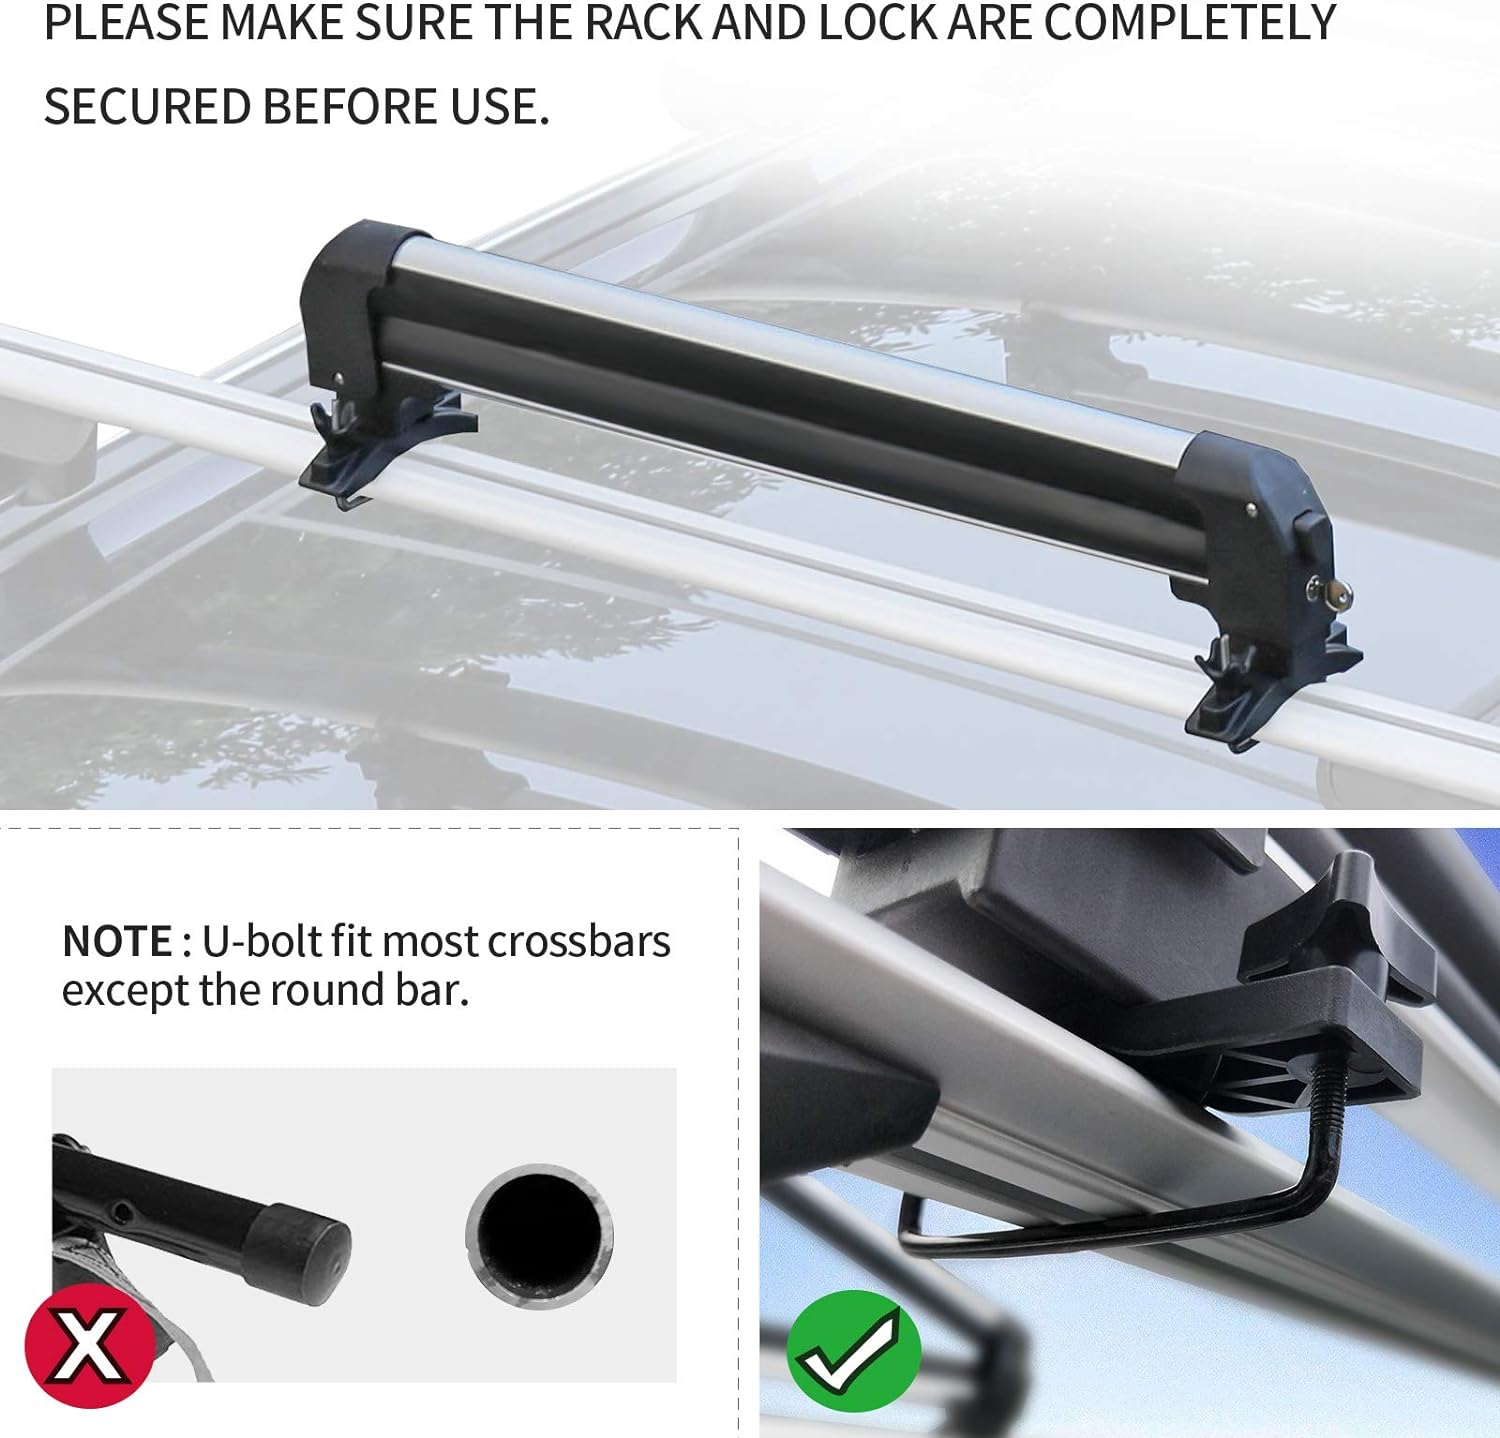 Leader Accessories Car Ski Snowboard Roof Racks, 2 PCS Universal Ski Roof Rack Carriers Snowboard Top Holder, Lockable Fit Most Vehicles Equipped